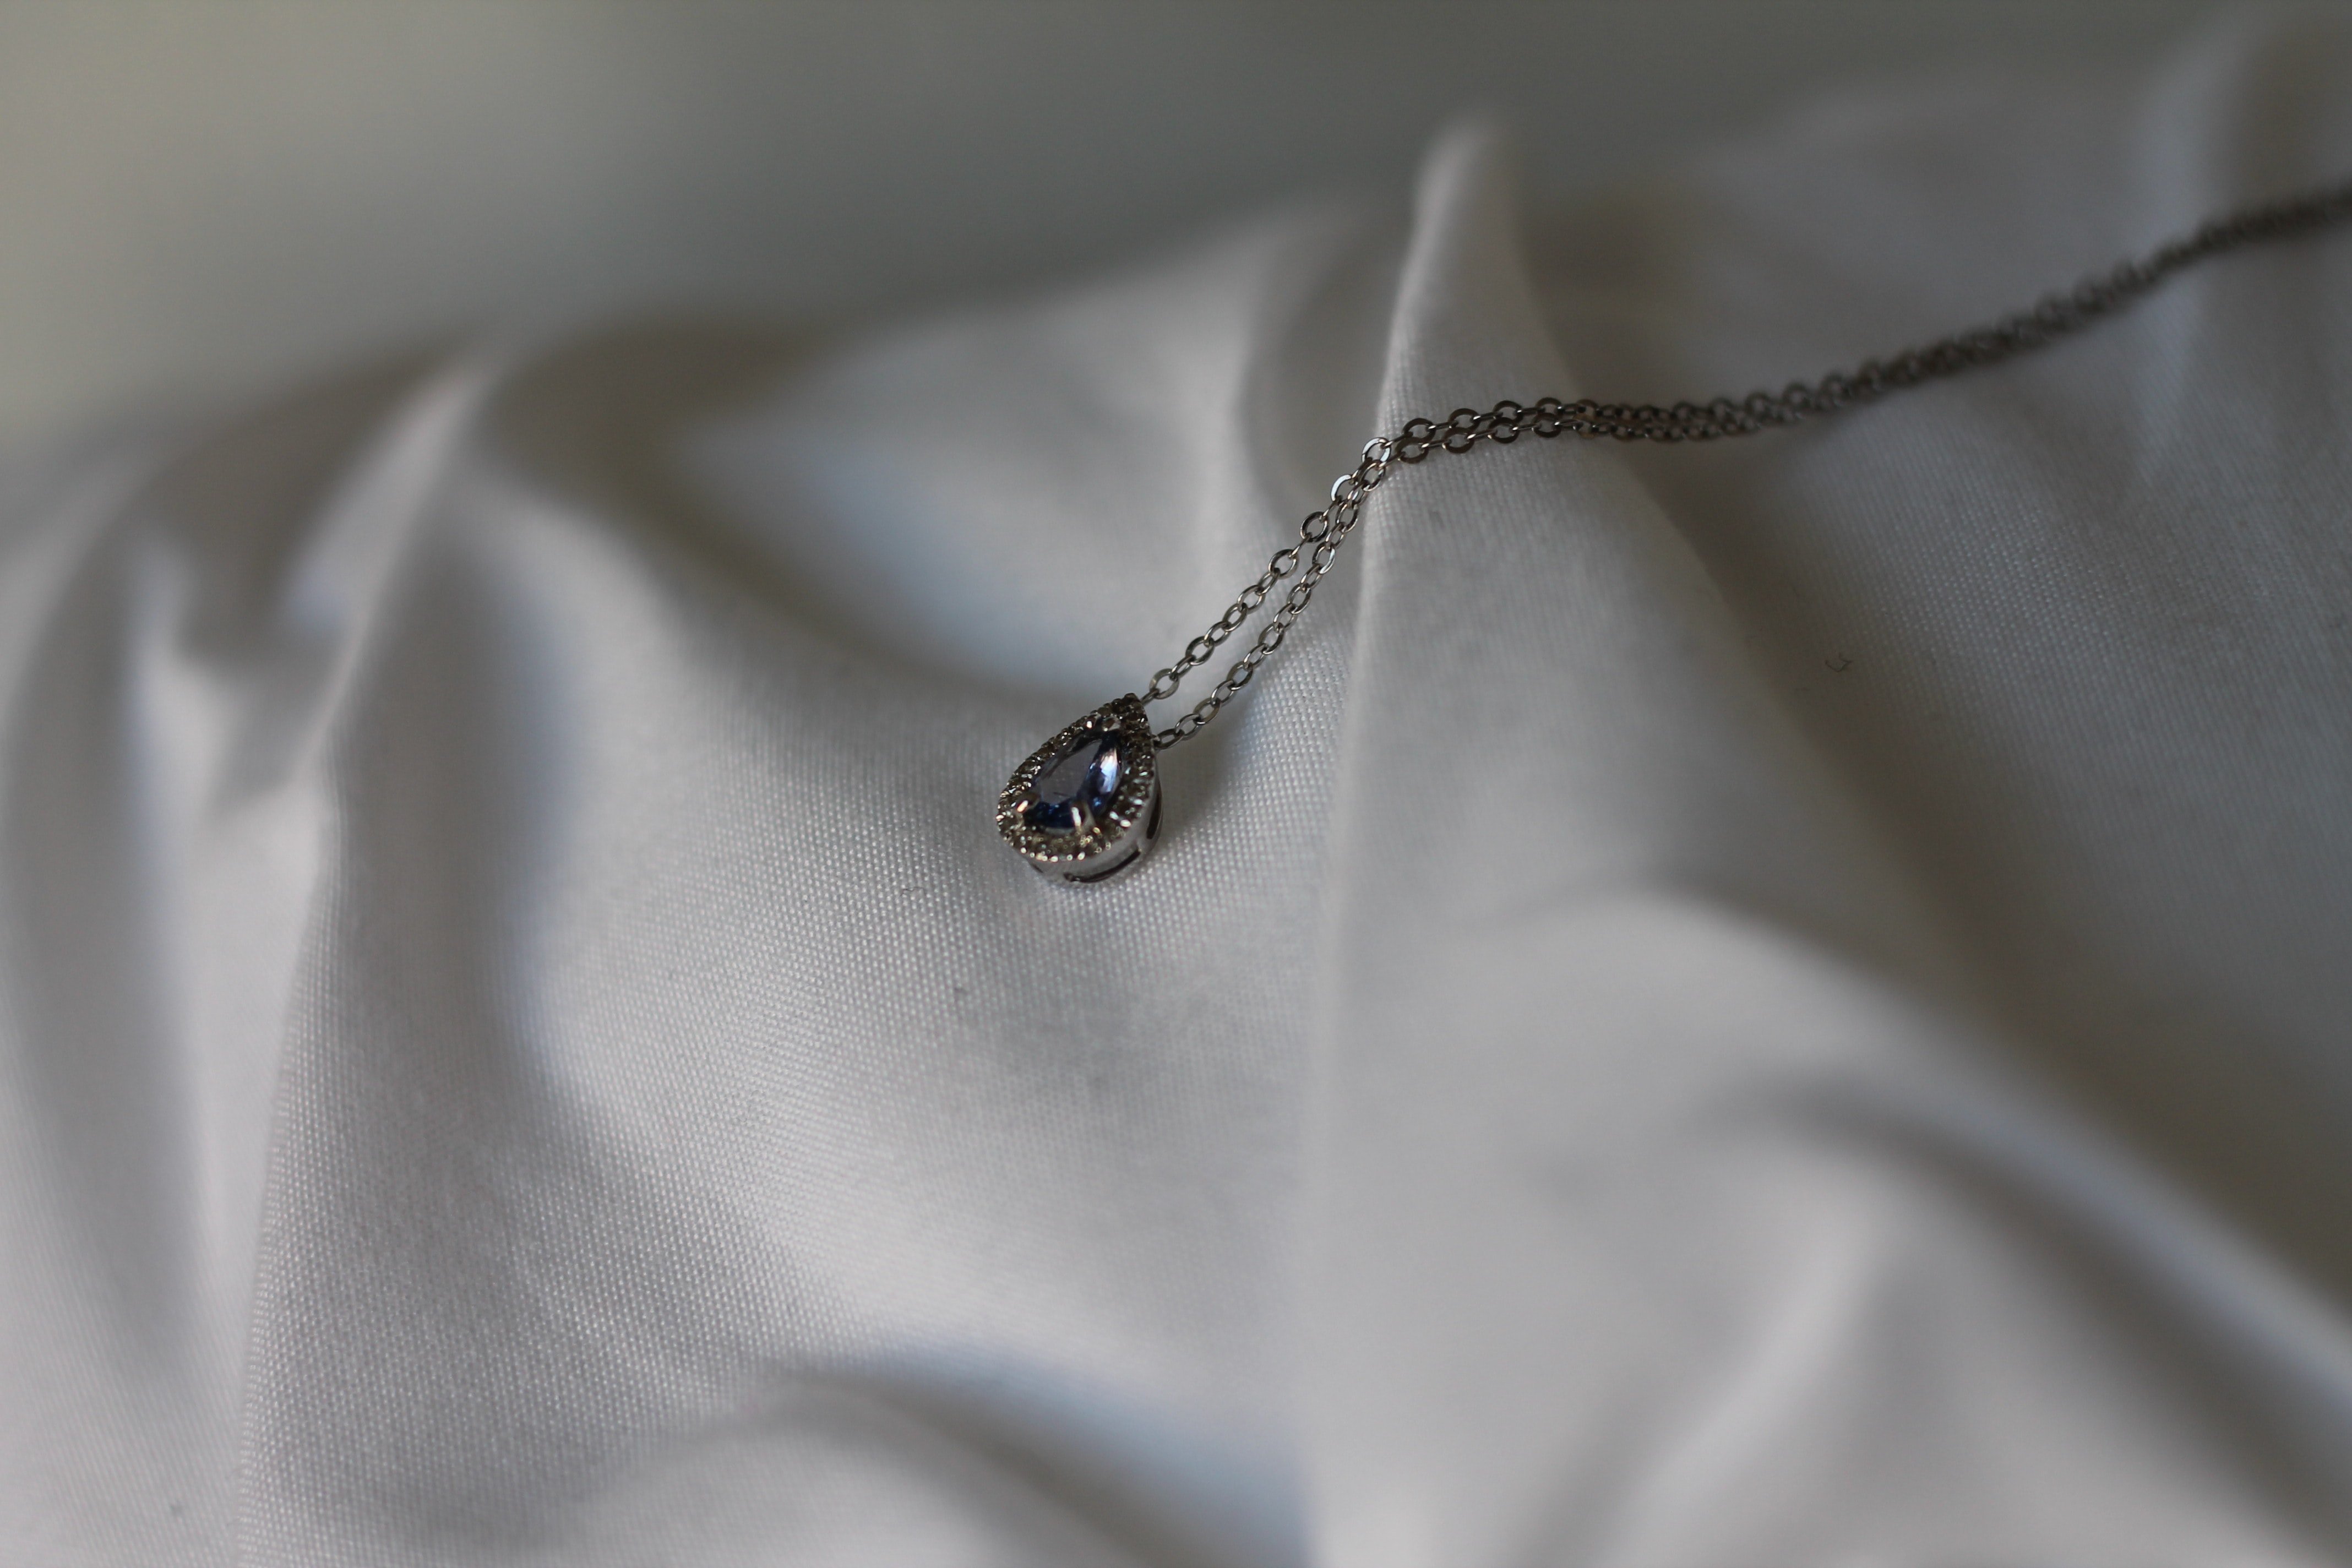 Janet found the diamond necklace in the stroller. | Source: Unsplash